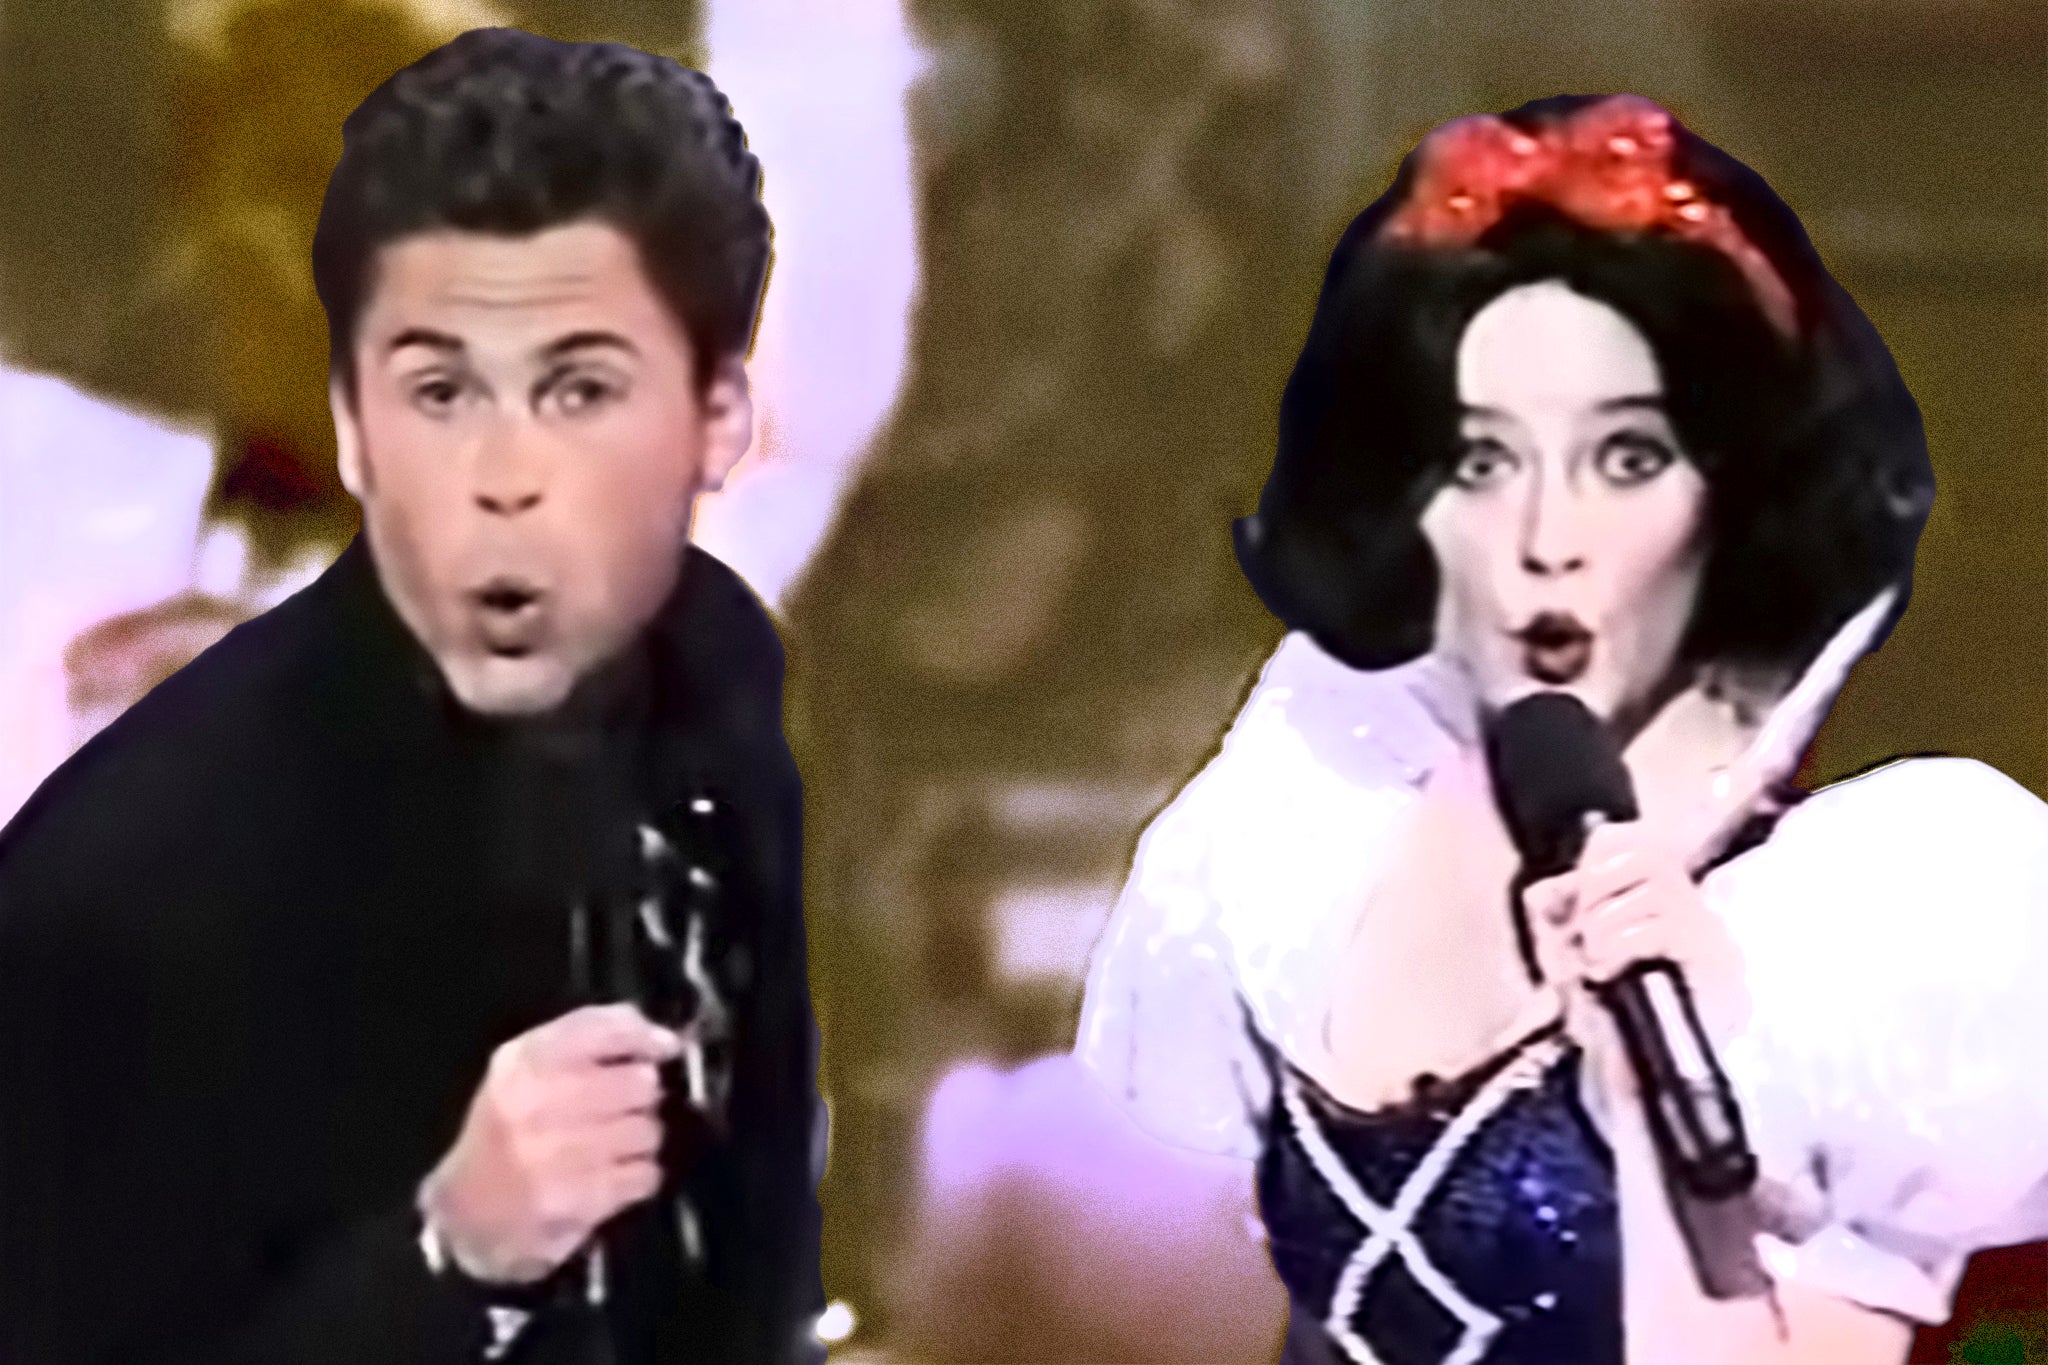 The musical number from hell: Rob Lowe and Eileen Bowman perform an infamous duet at the 1989 Oscars